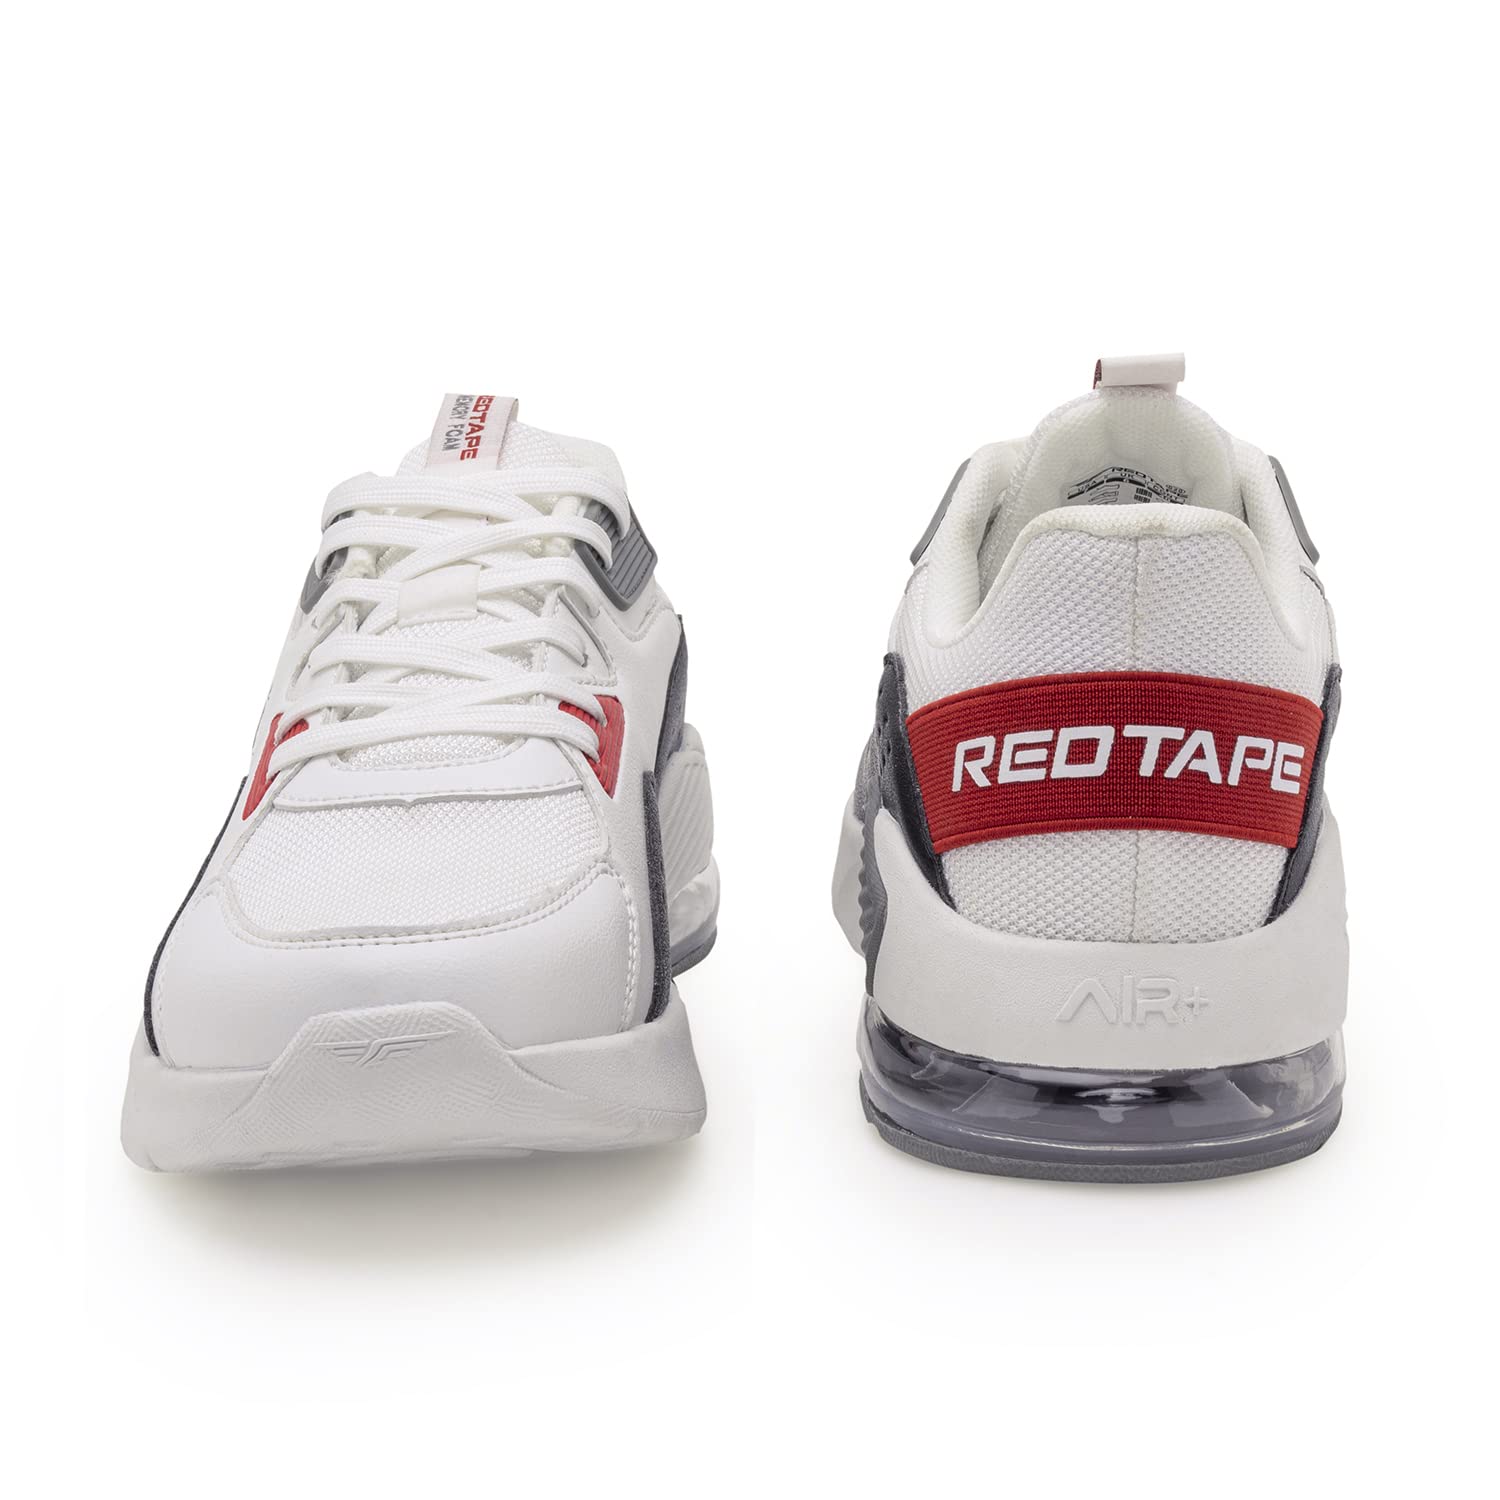 RedTape Casual Sneaker Shoes for Men, Soft Cushioned Insole, Slip-Res